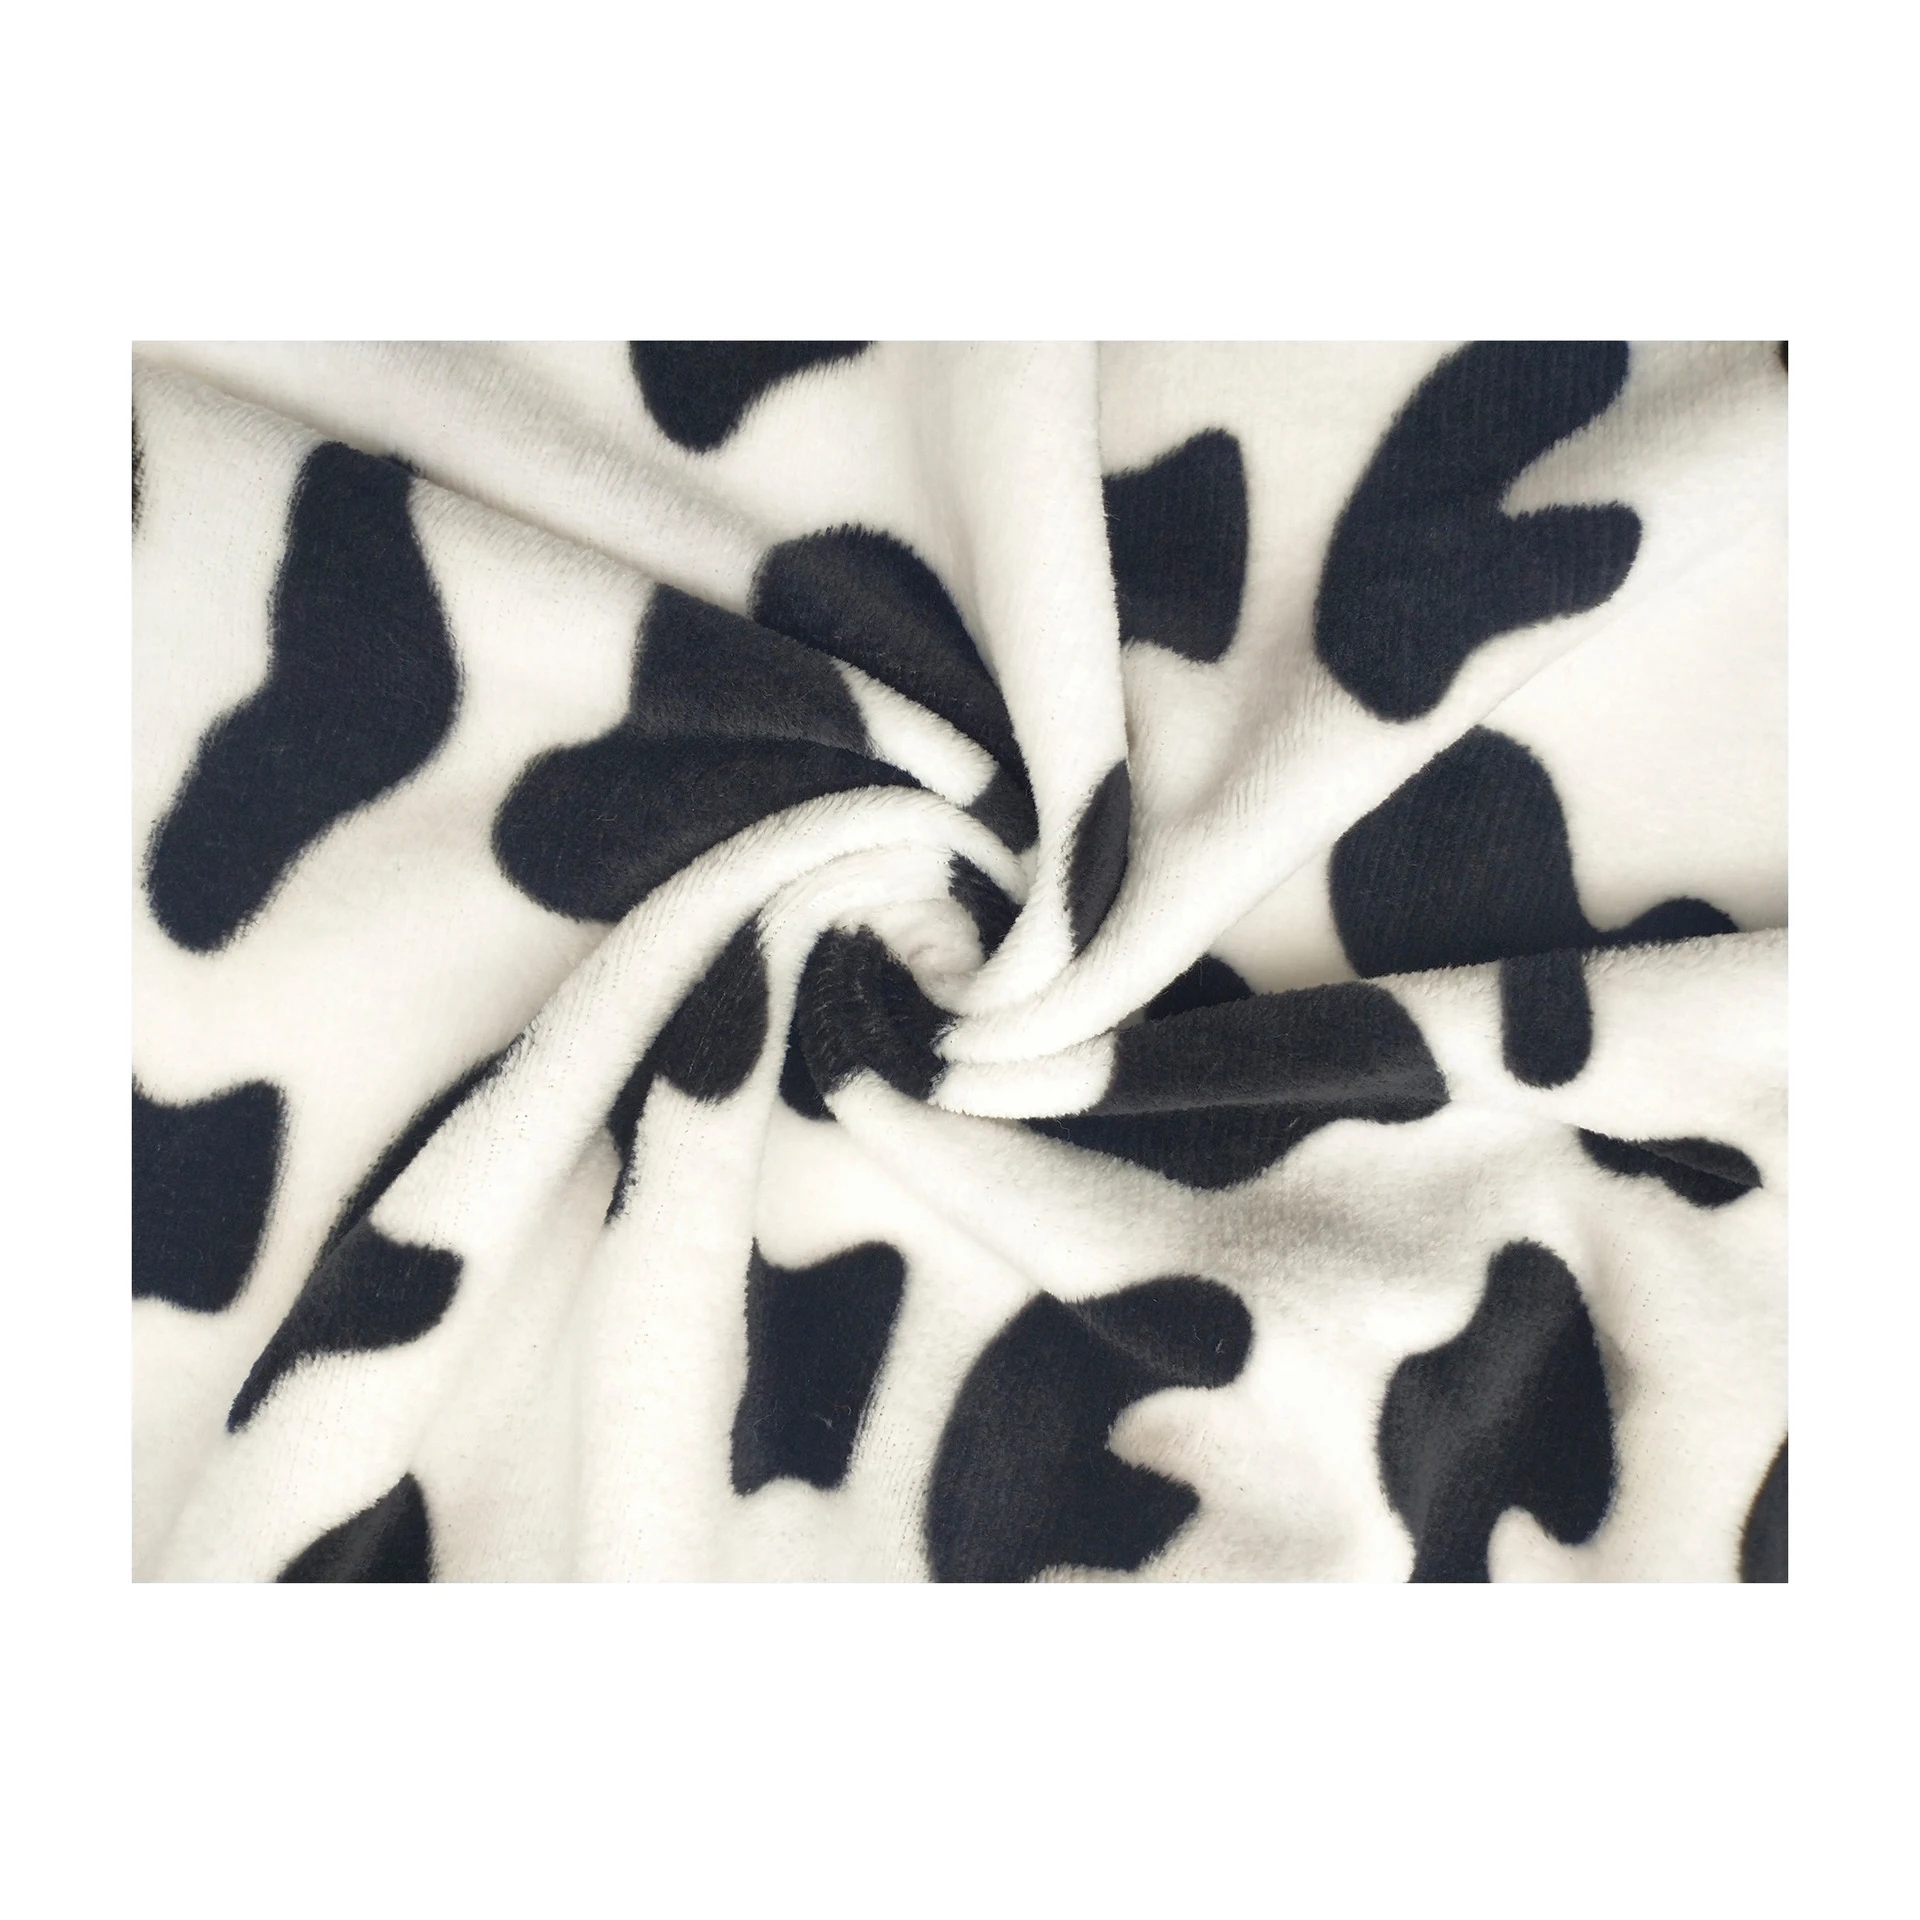 New design double sided flannel cows print fleece fabric 220 280g for blankets (1600394986181)